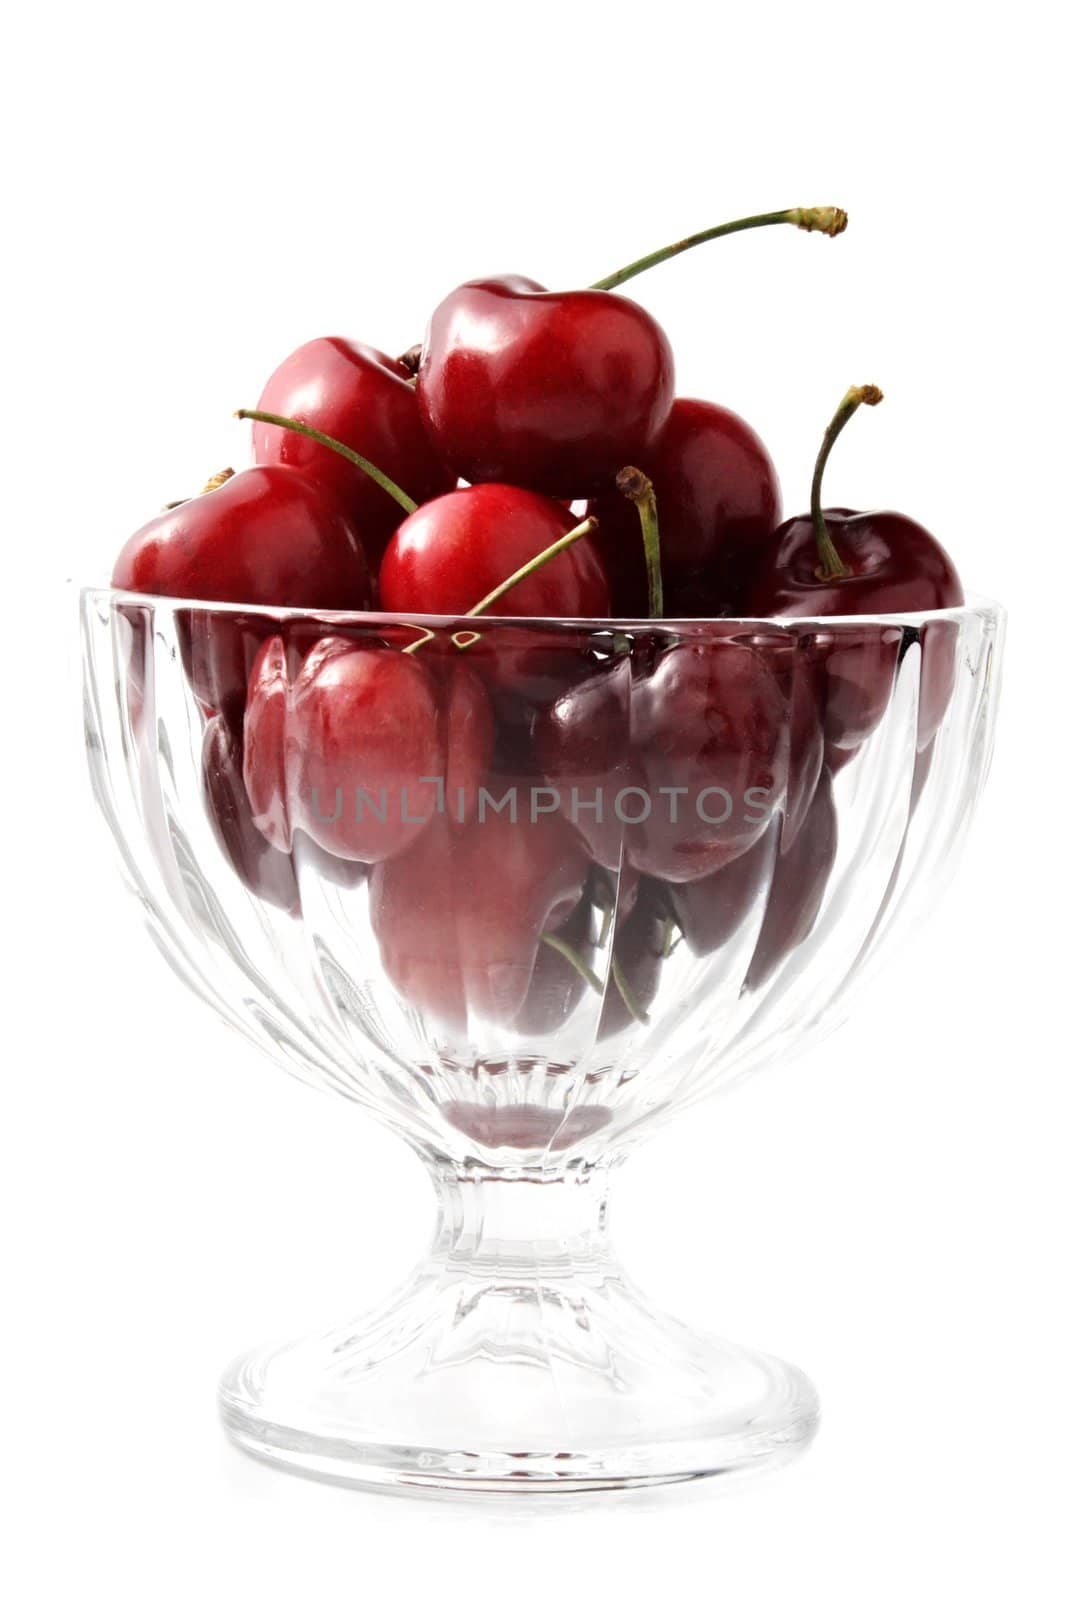 cherries in a glass bowl by lanalanglois